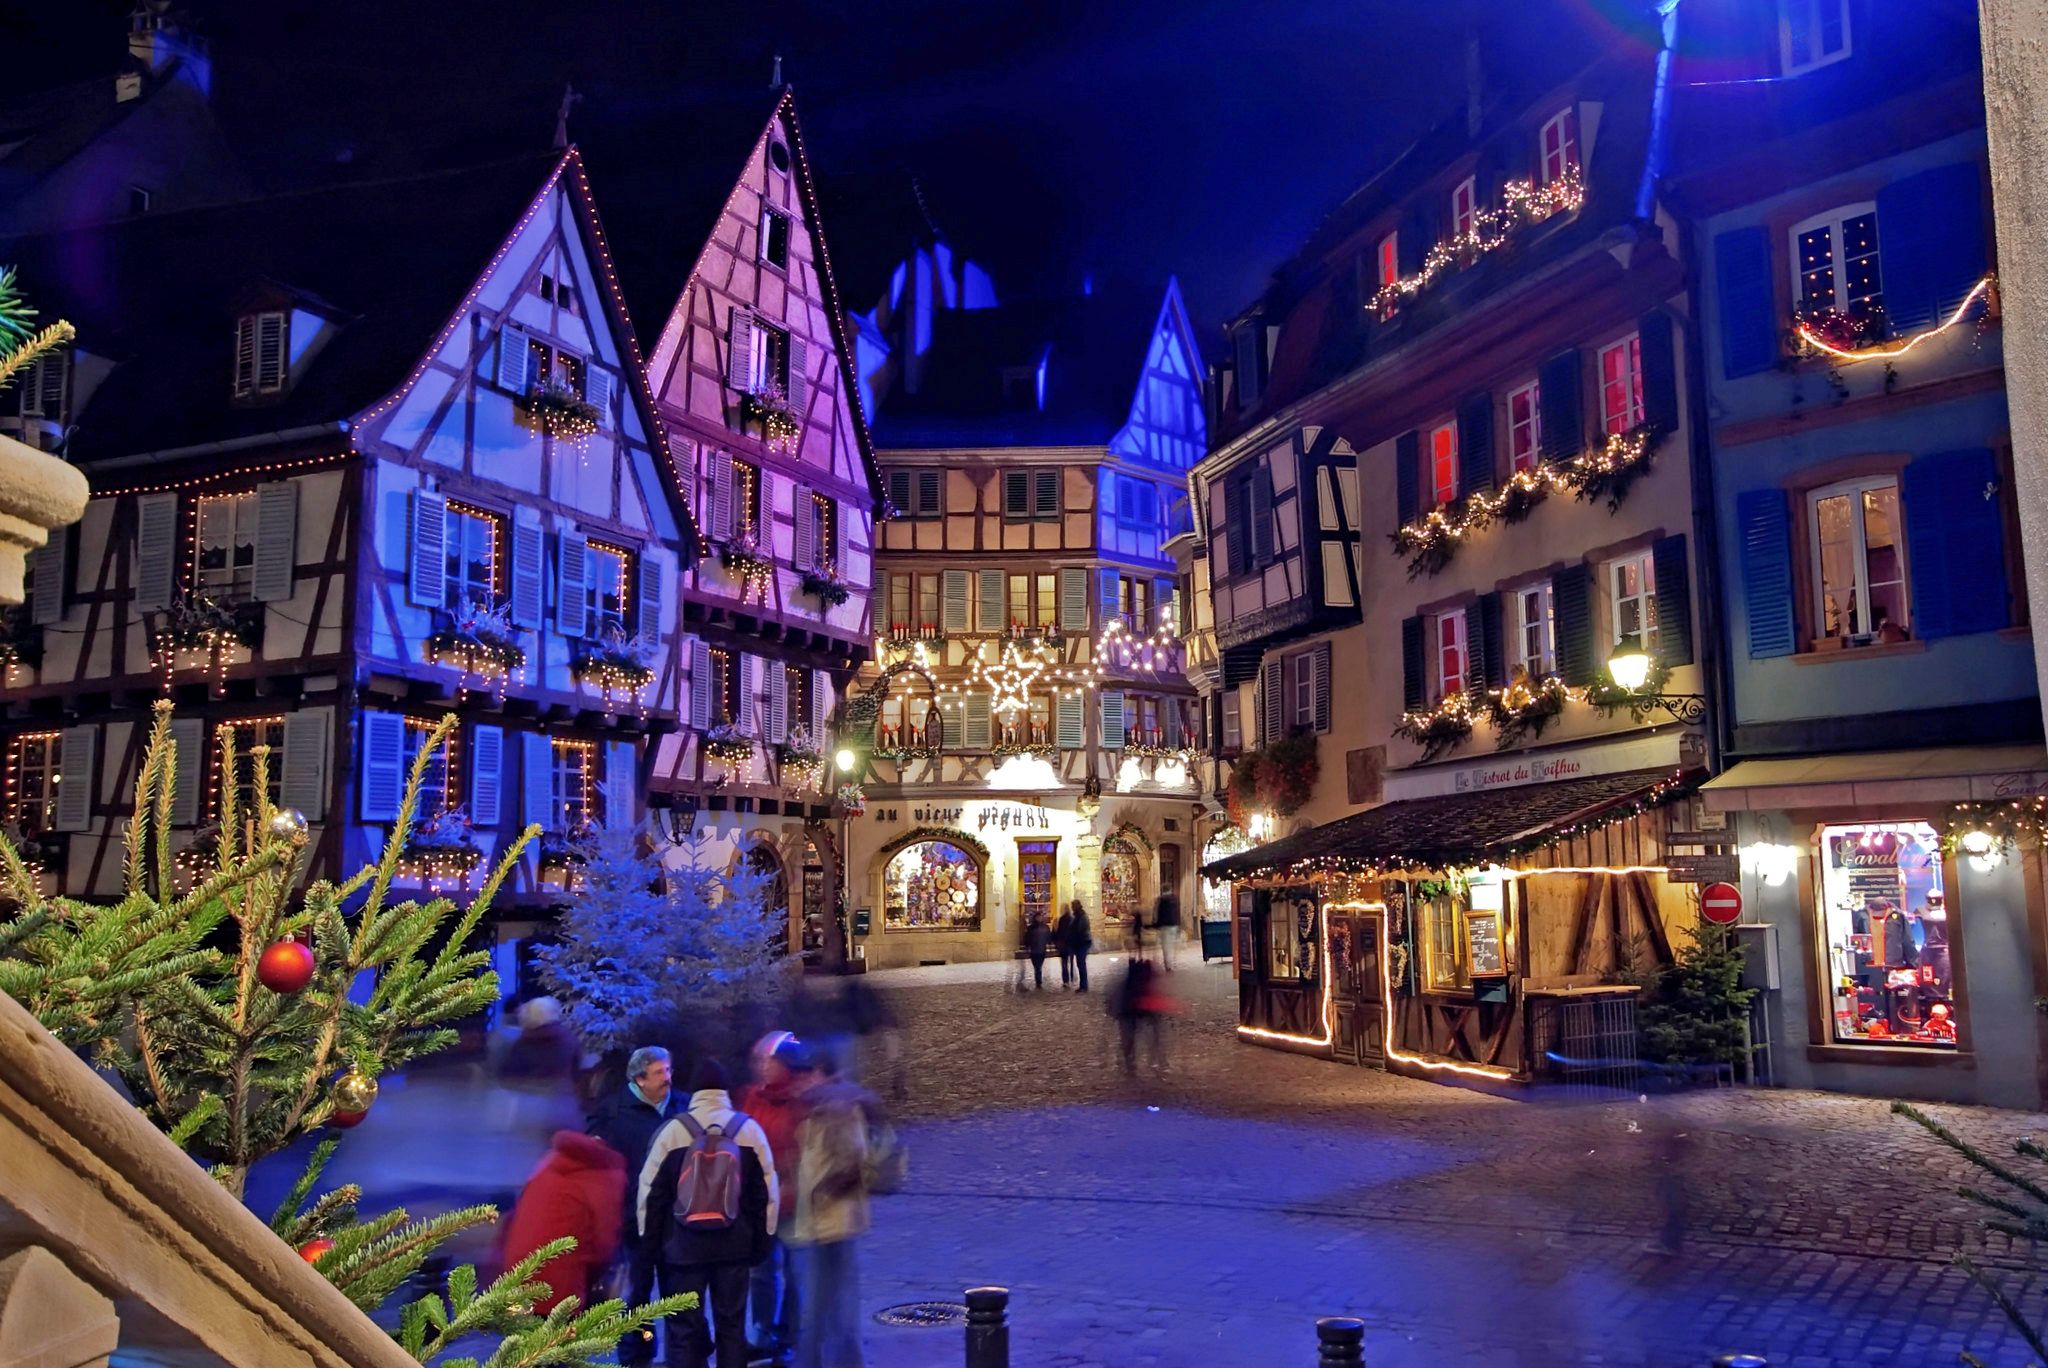 Colmar, France features some of the best Christmas markets in Europe